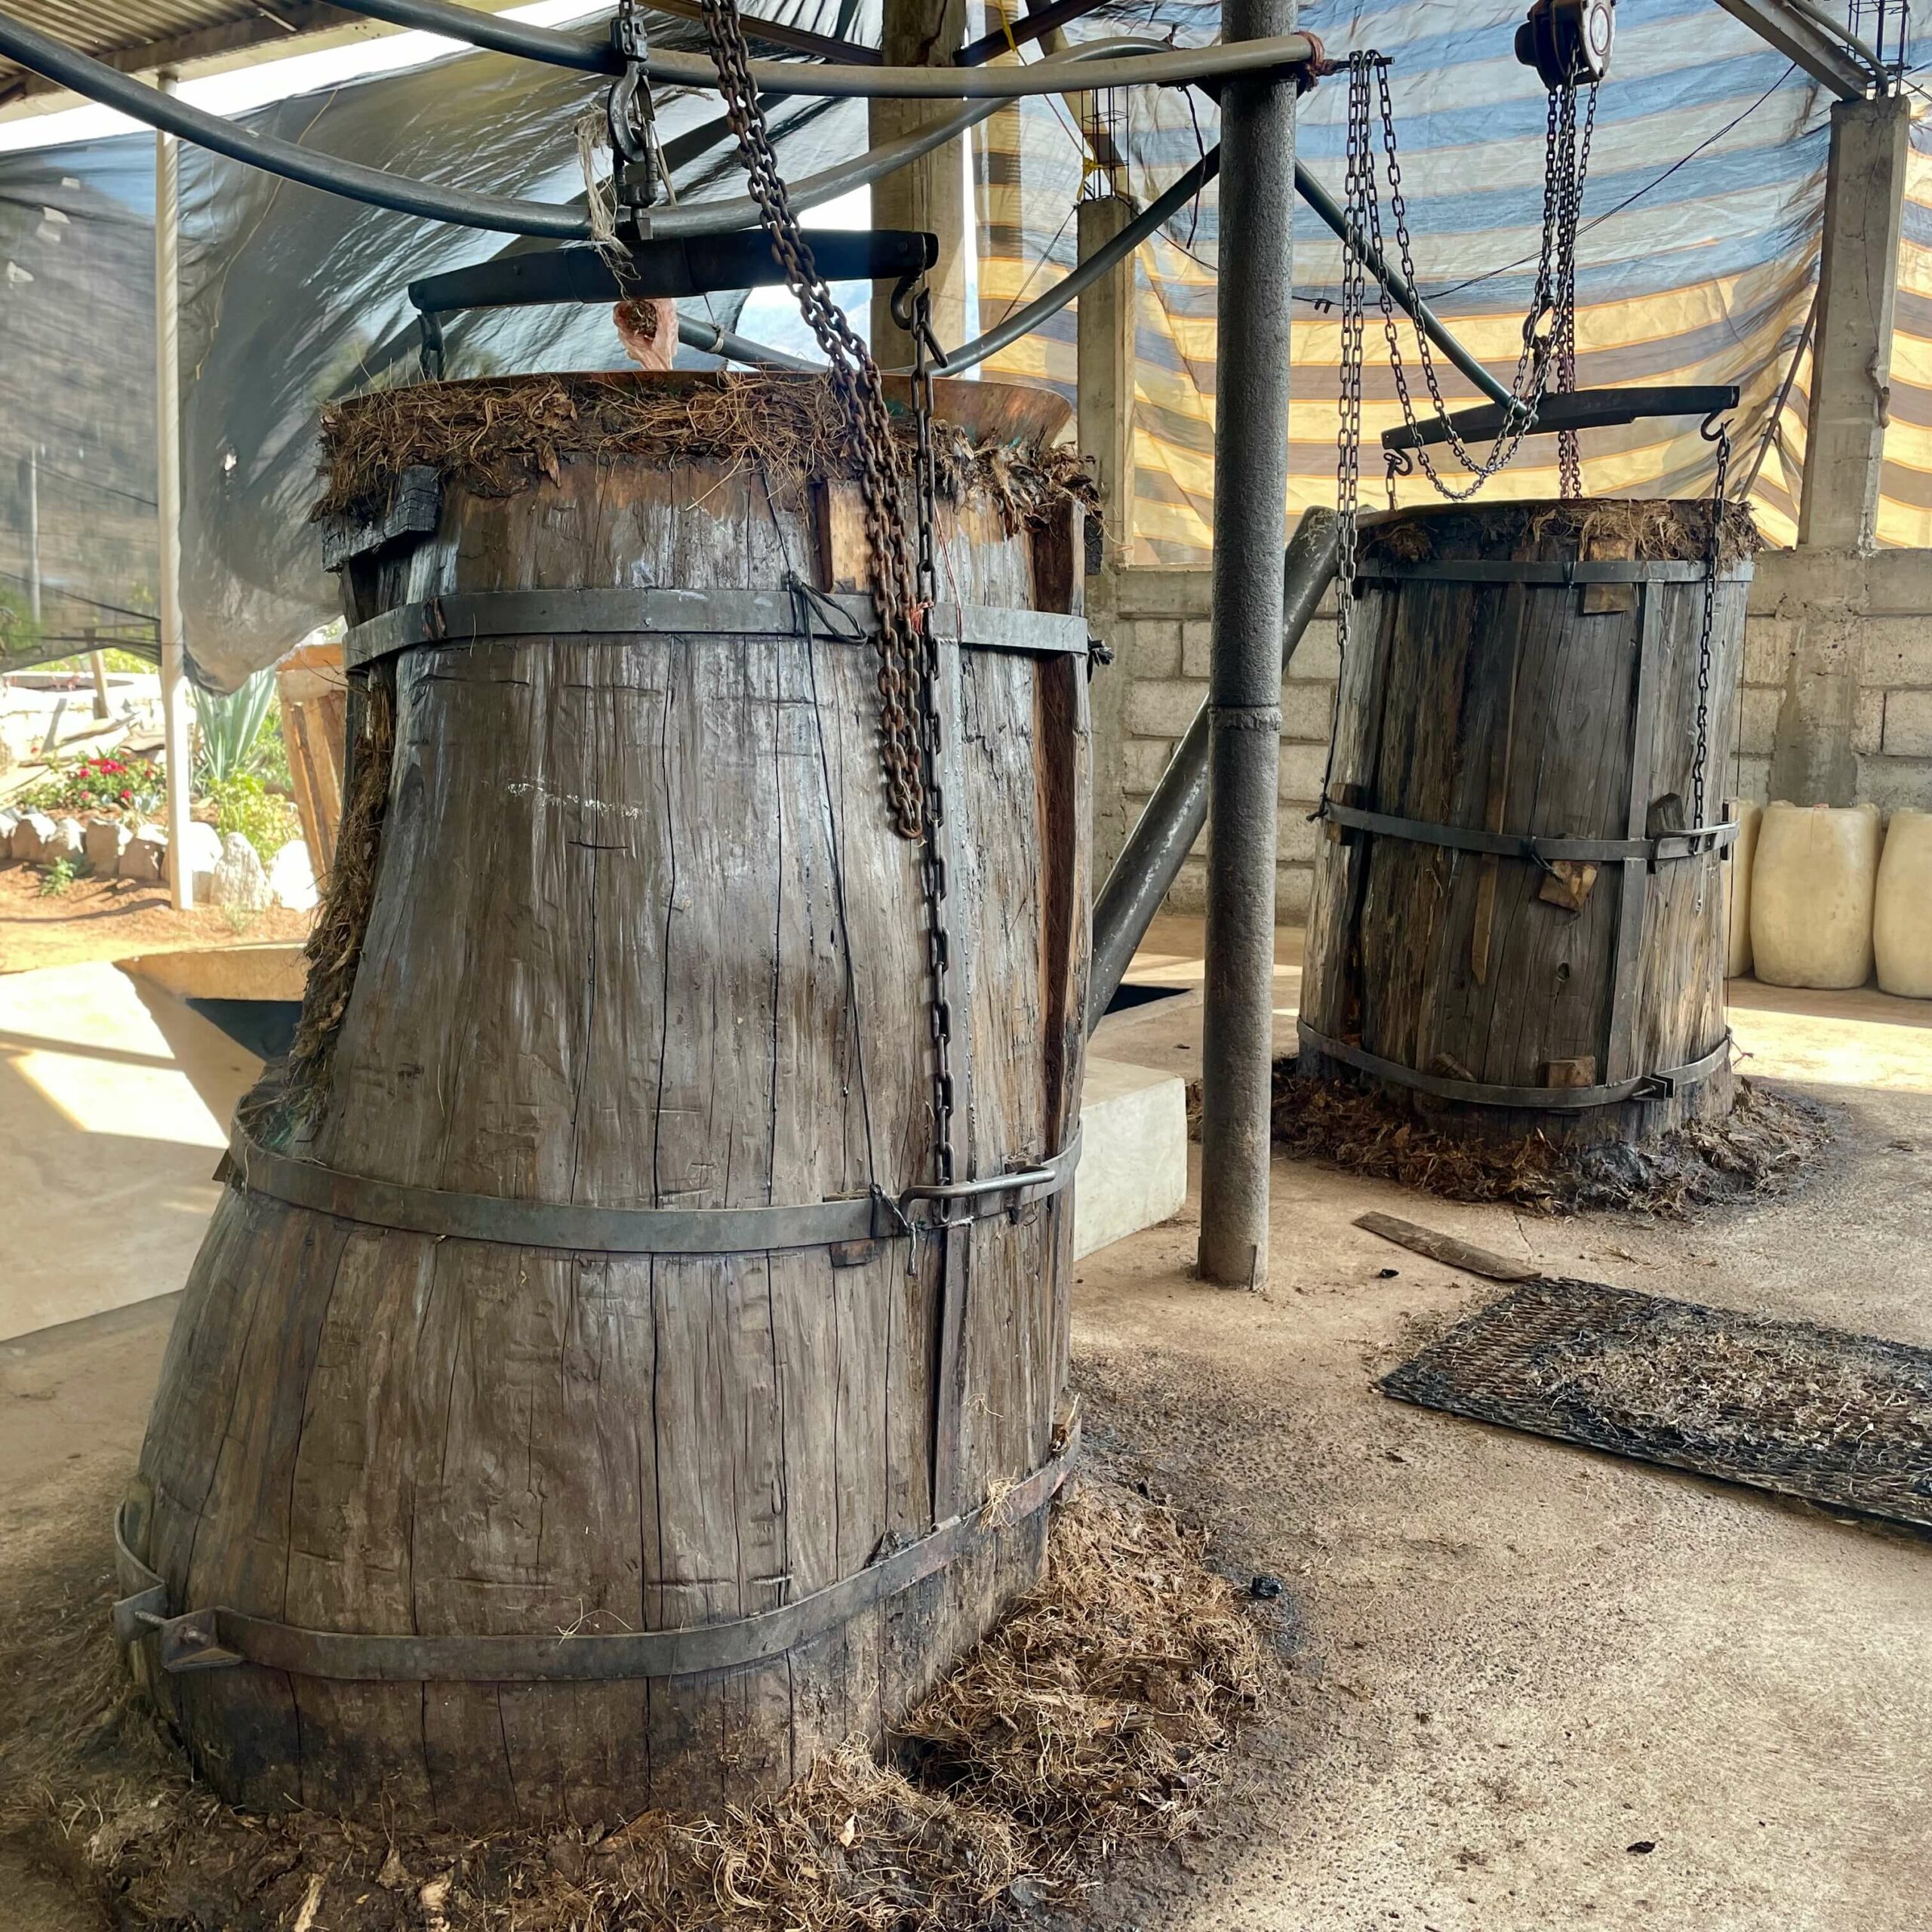 Two Filipino mezcal stills with wooden tops